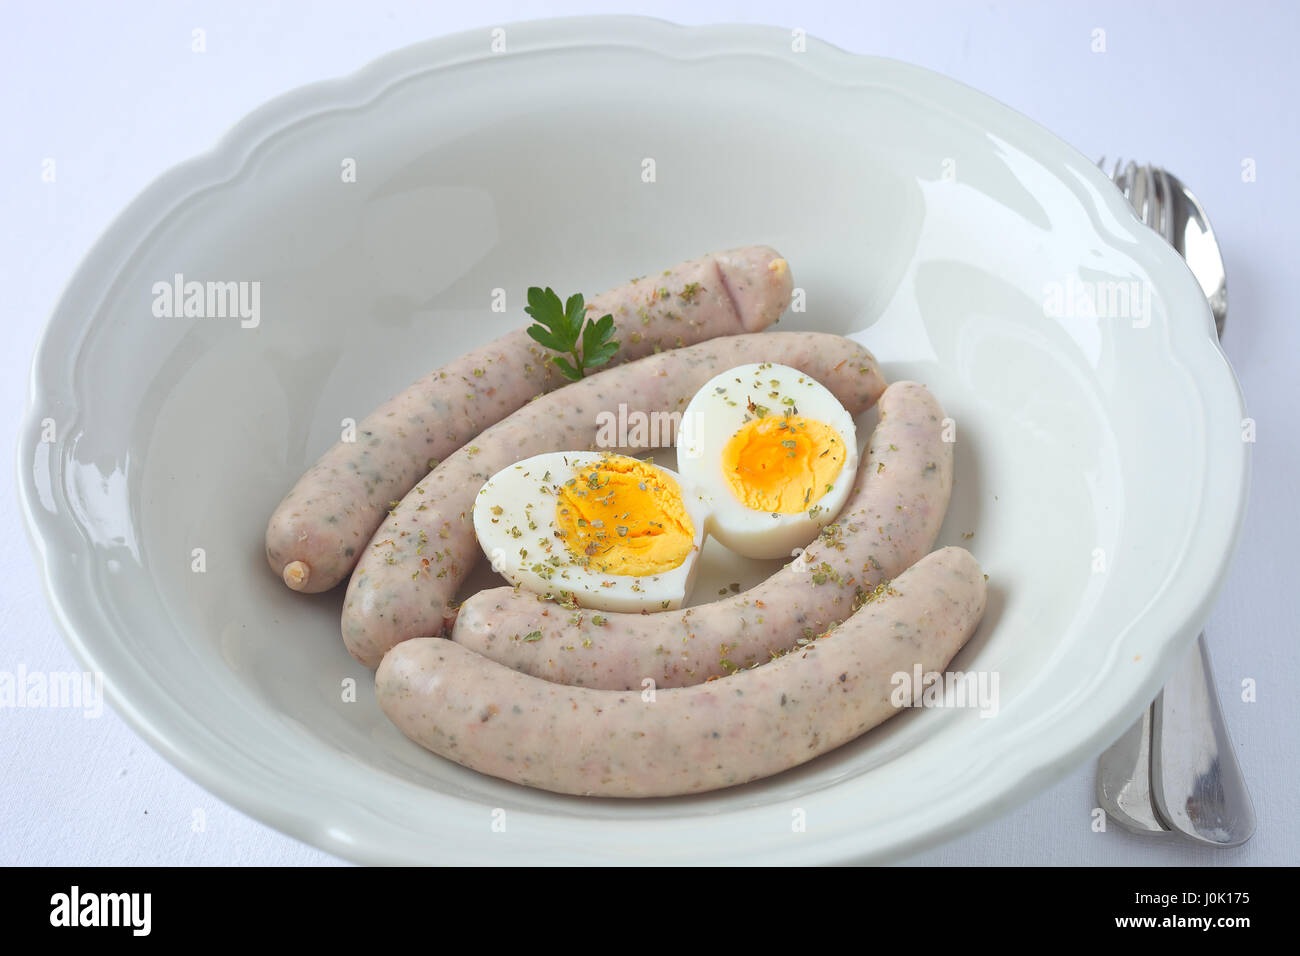 White sausage and egg in a soup bowl. Stock Photo